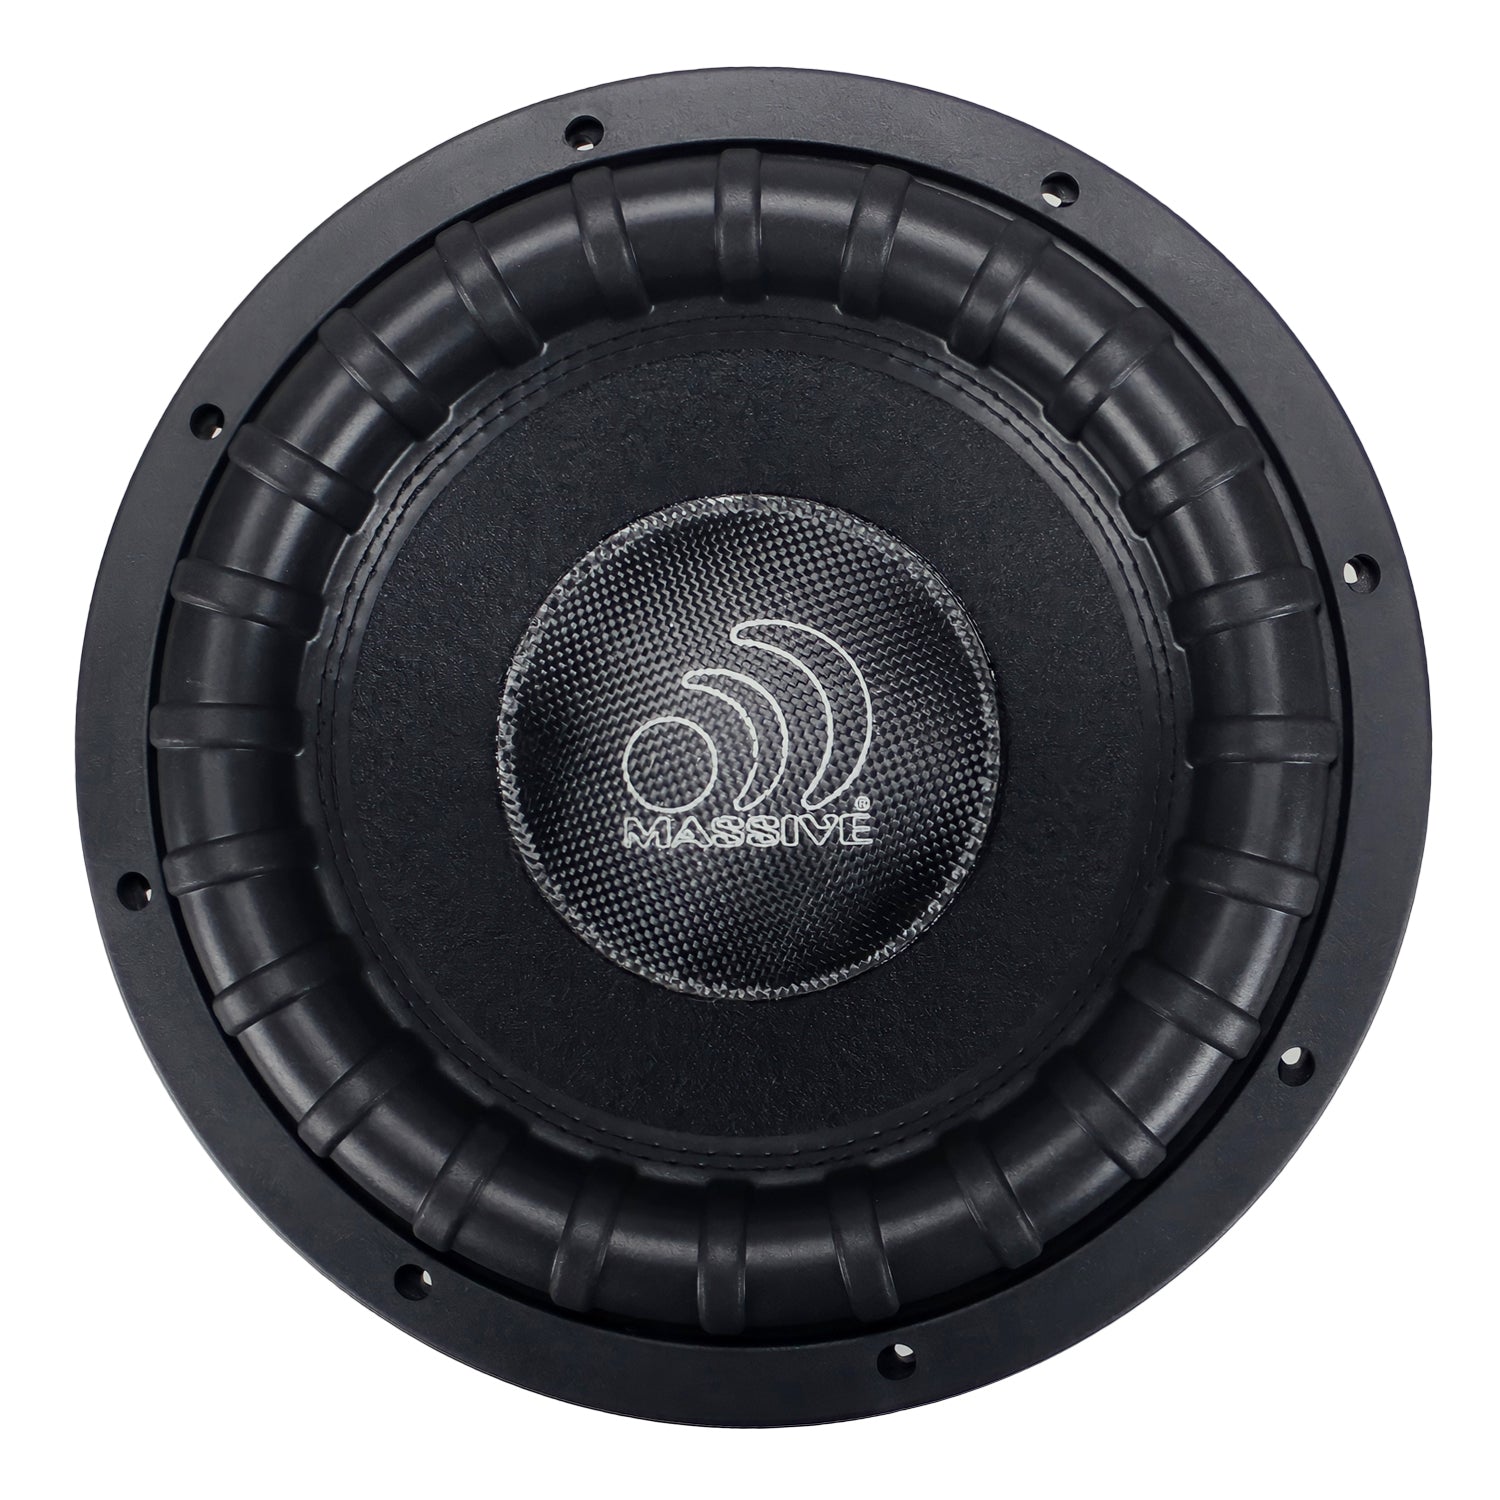 MGK124 - 12" 750 Watts RMS Dual 4 Ohm Subwoofer